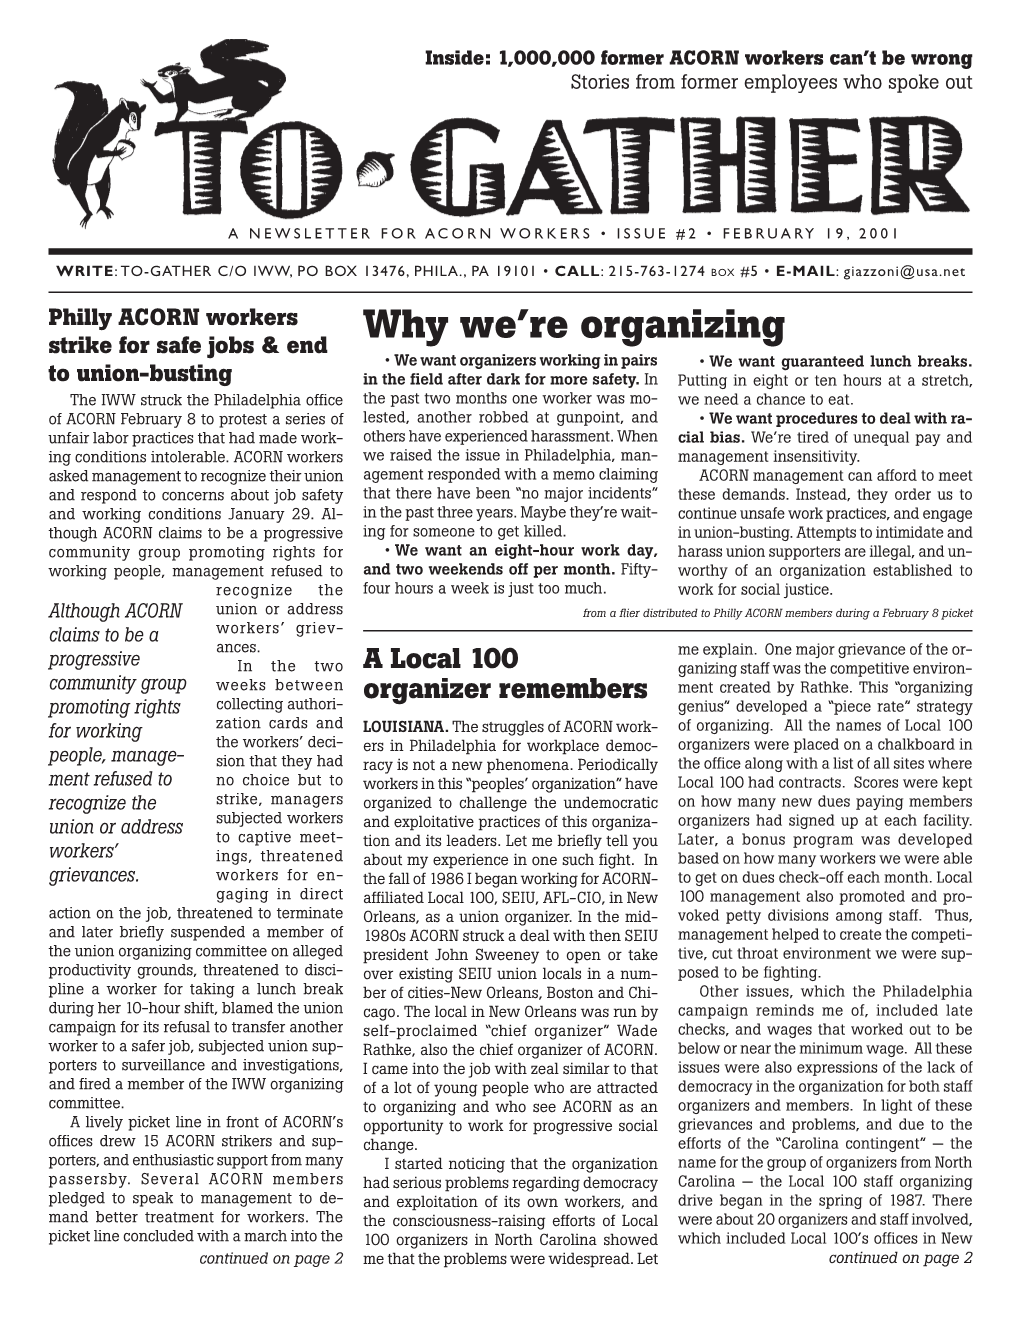 Why We're Organizing